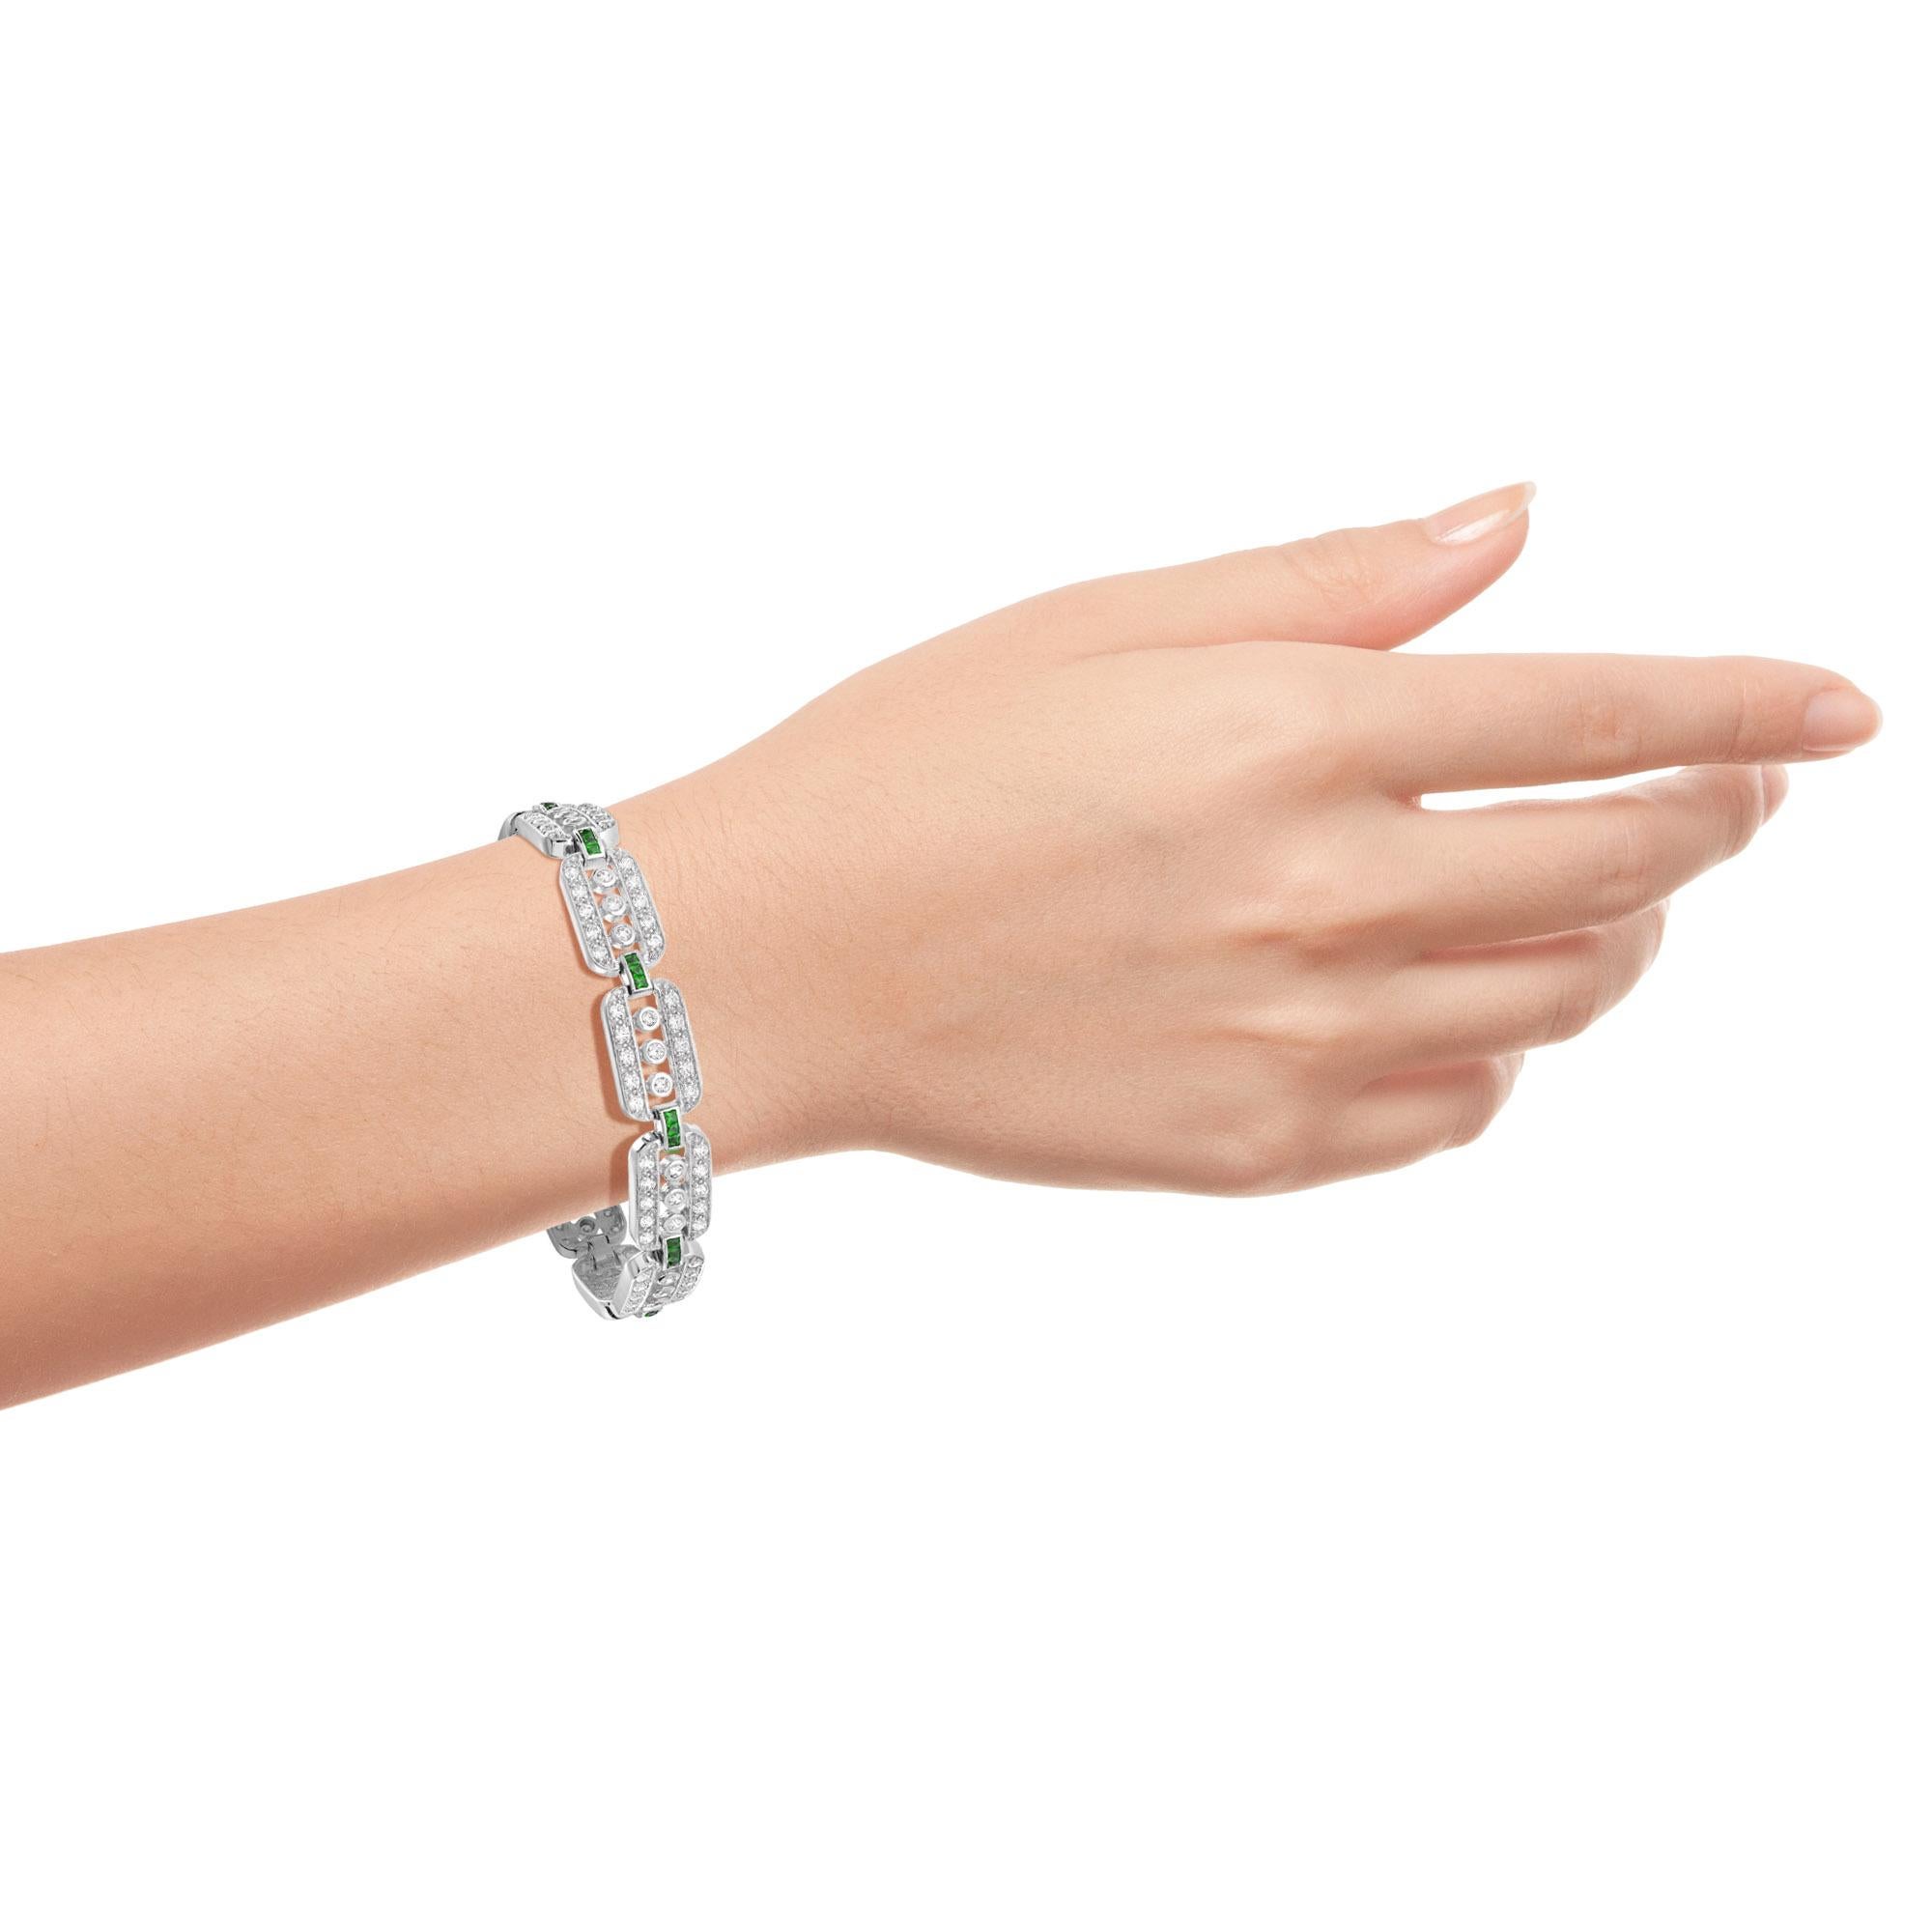 6 Ct. Diamond and Emerald Art Deco Style Link Bracelet in 14K White Gold For Sale 1